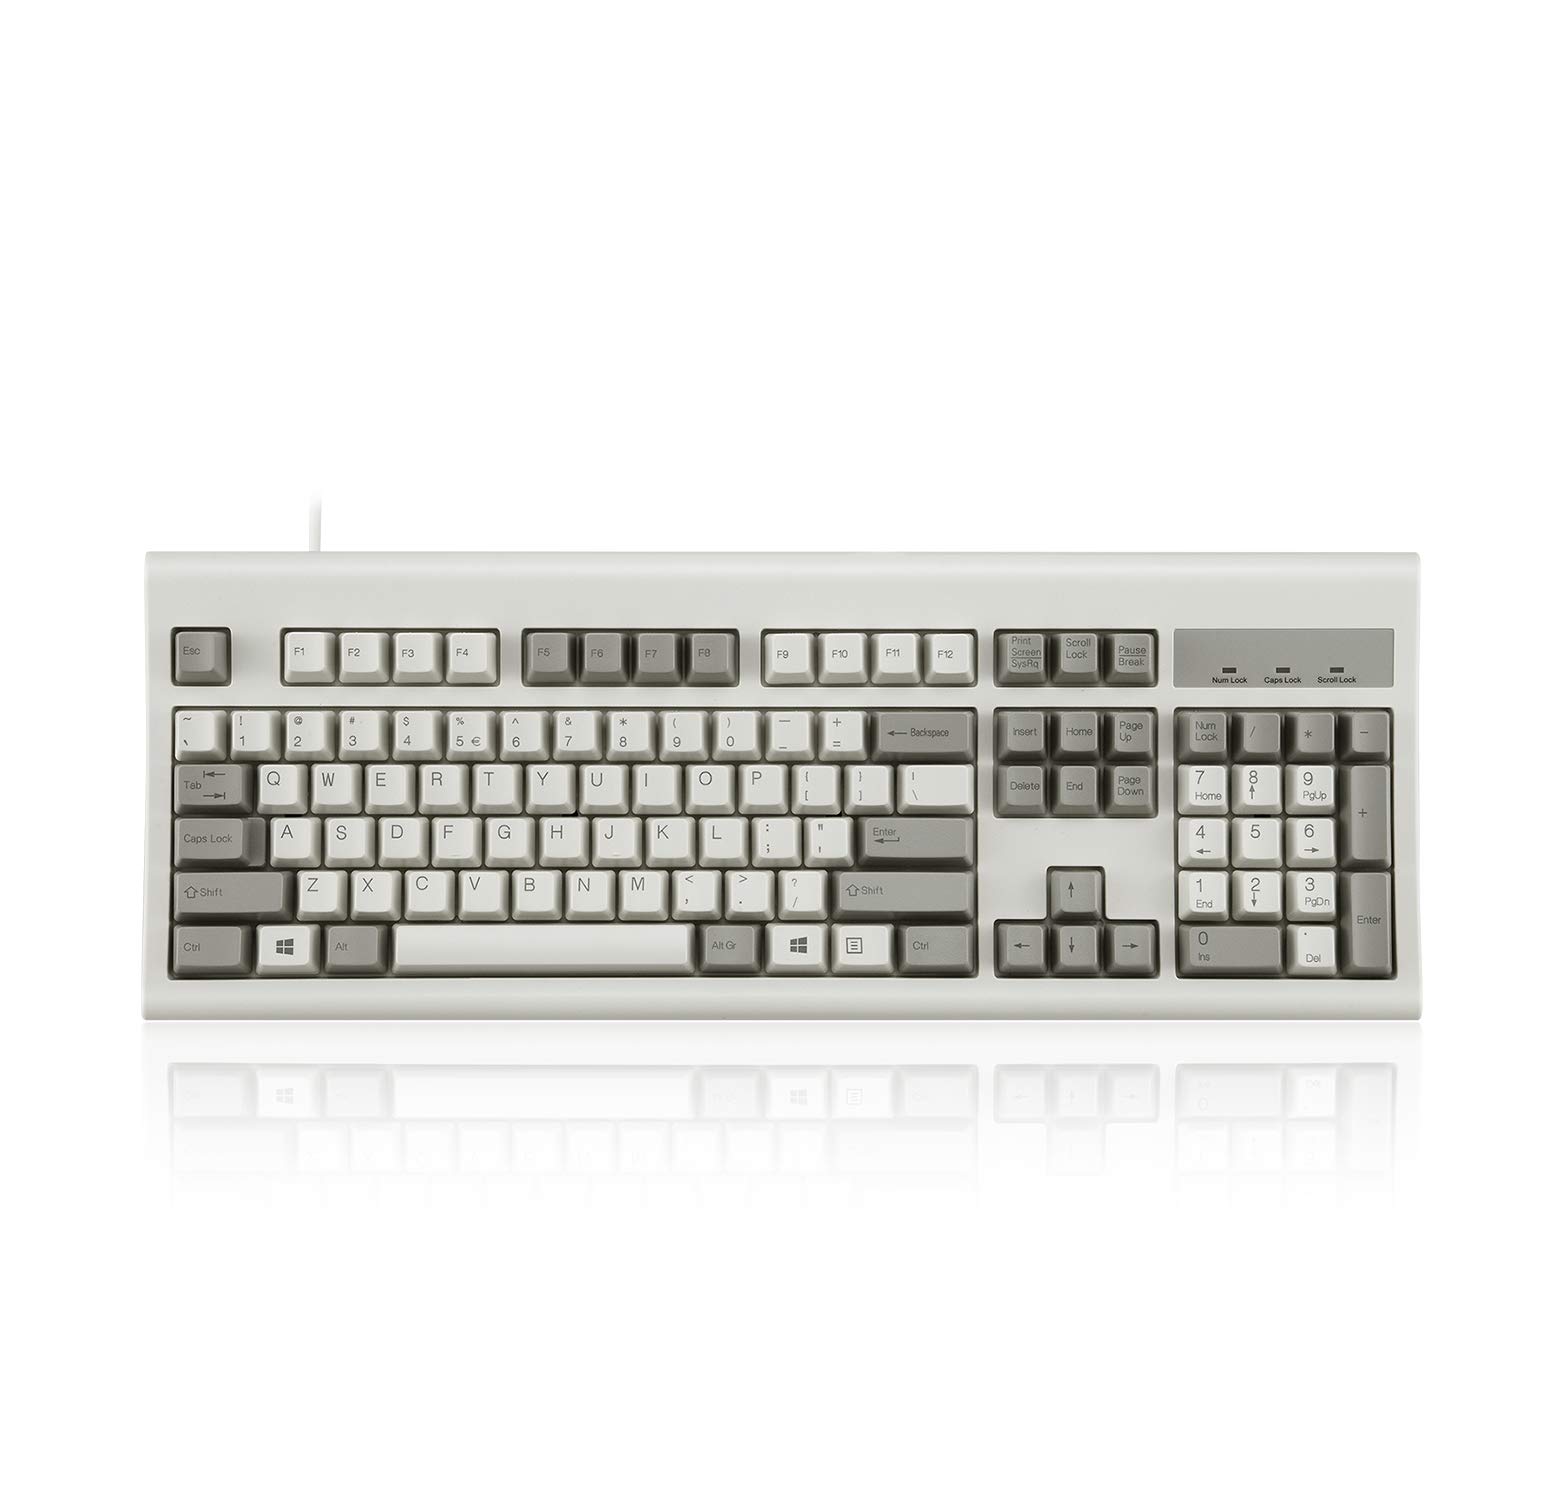 Perixx PERIBOARD-106M Wired Retro Keyboard with The Optical Mouse